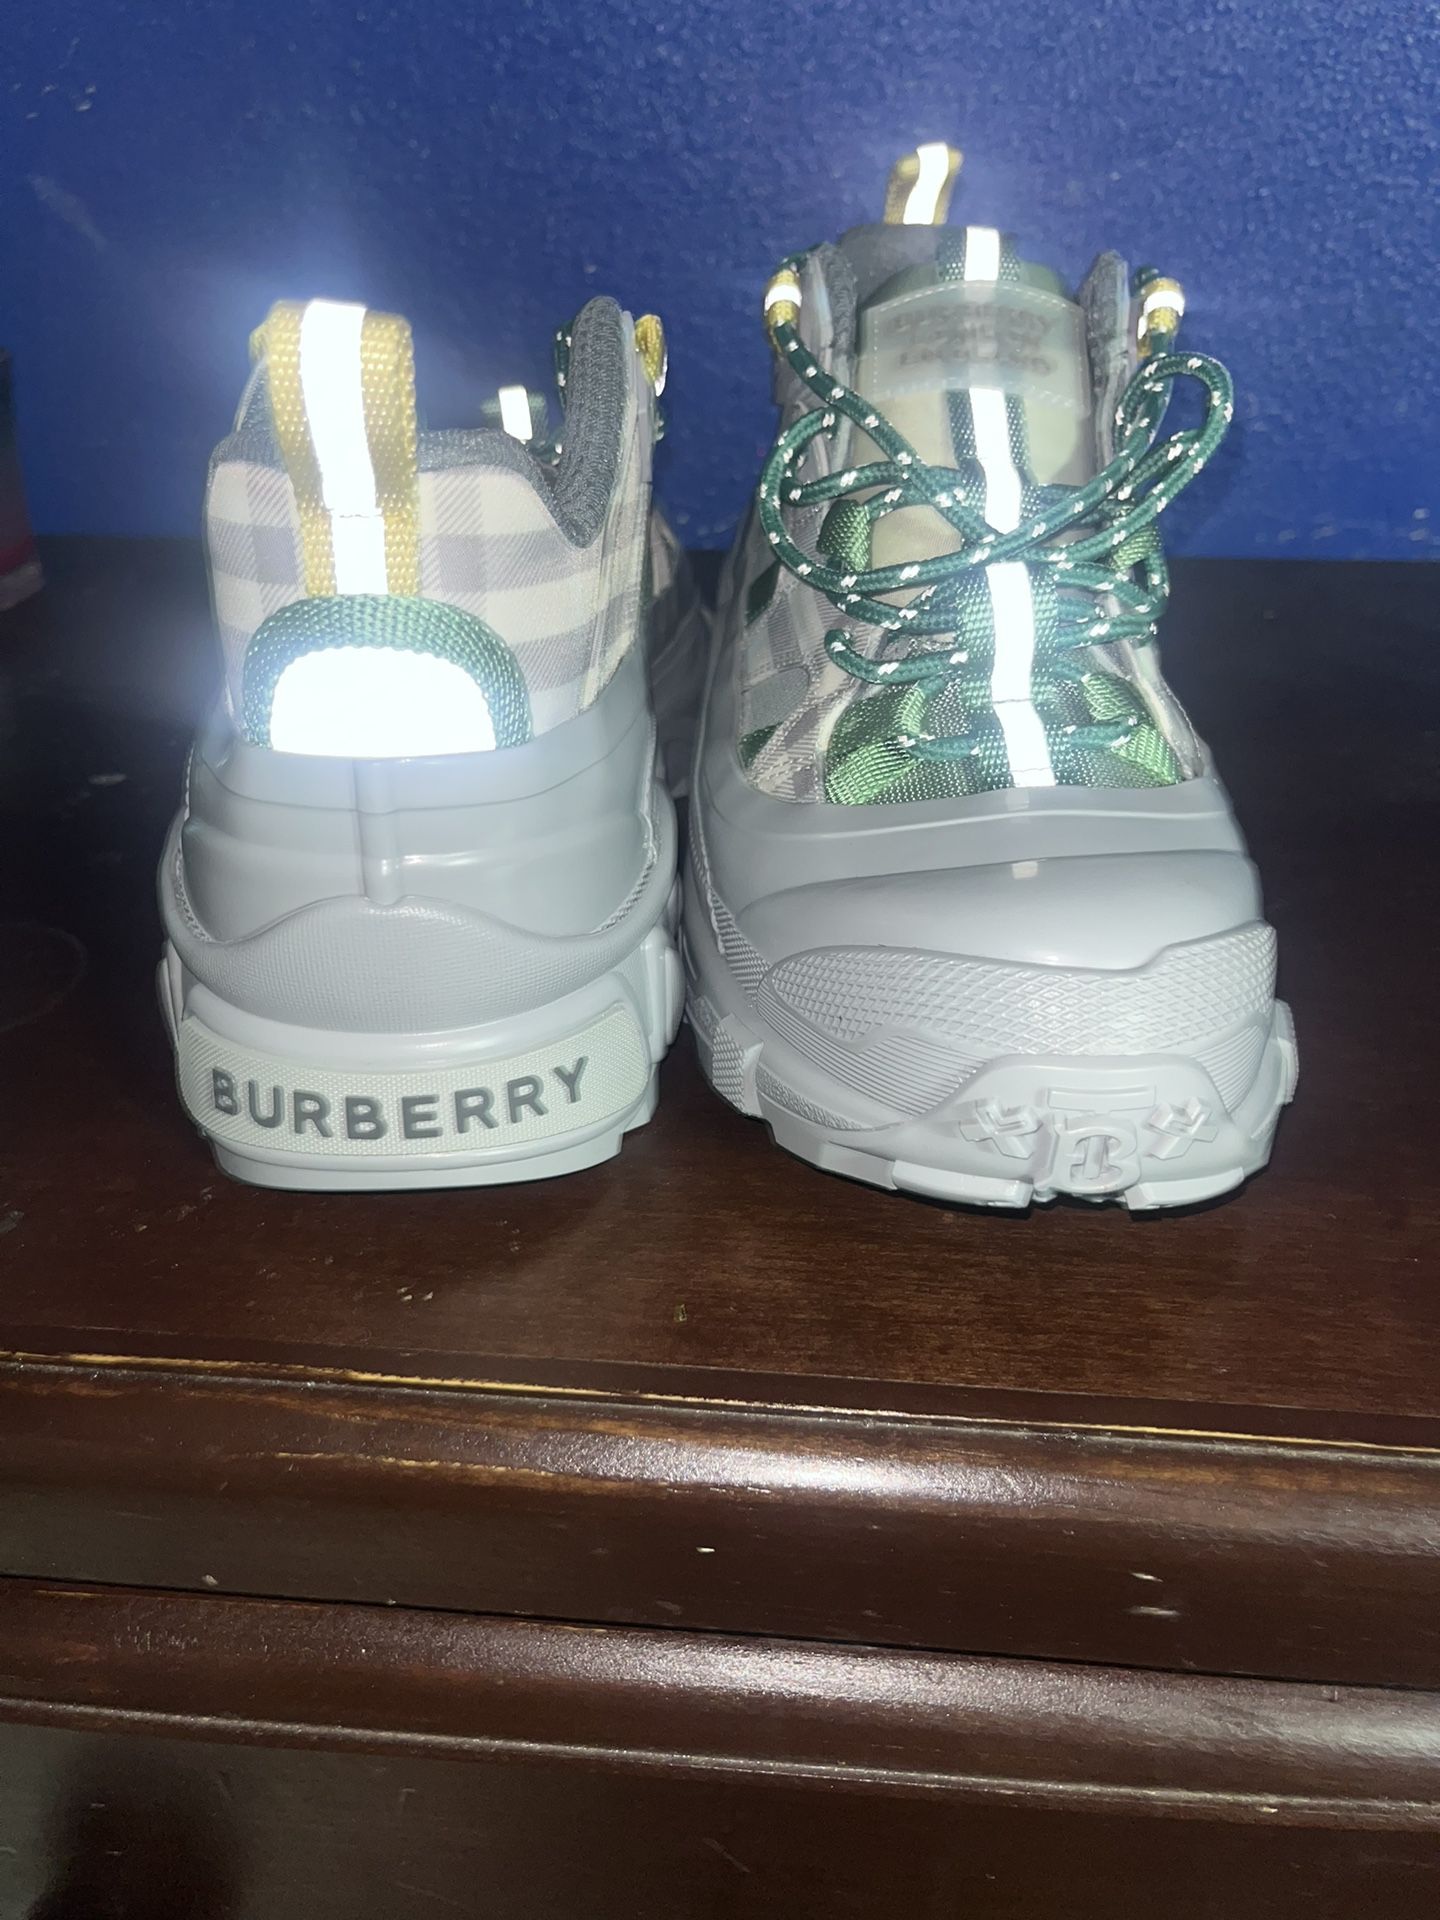 Burberry Sneakers Size 41 or 8.5 